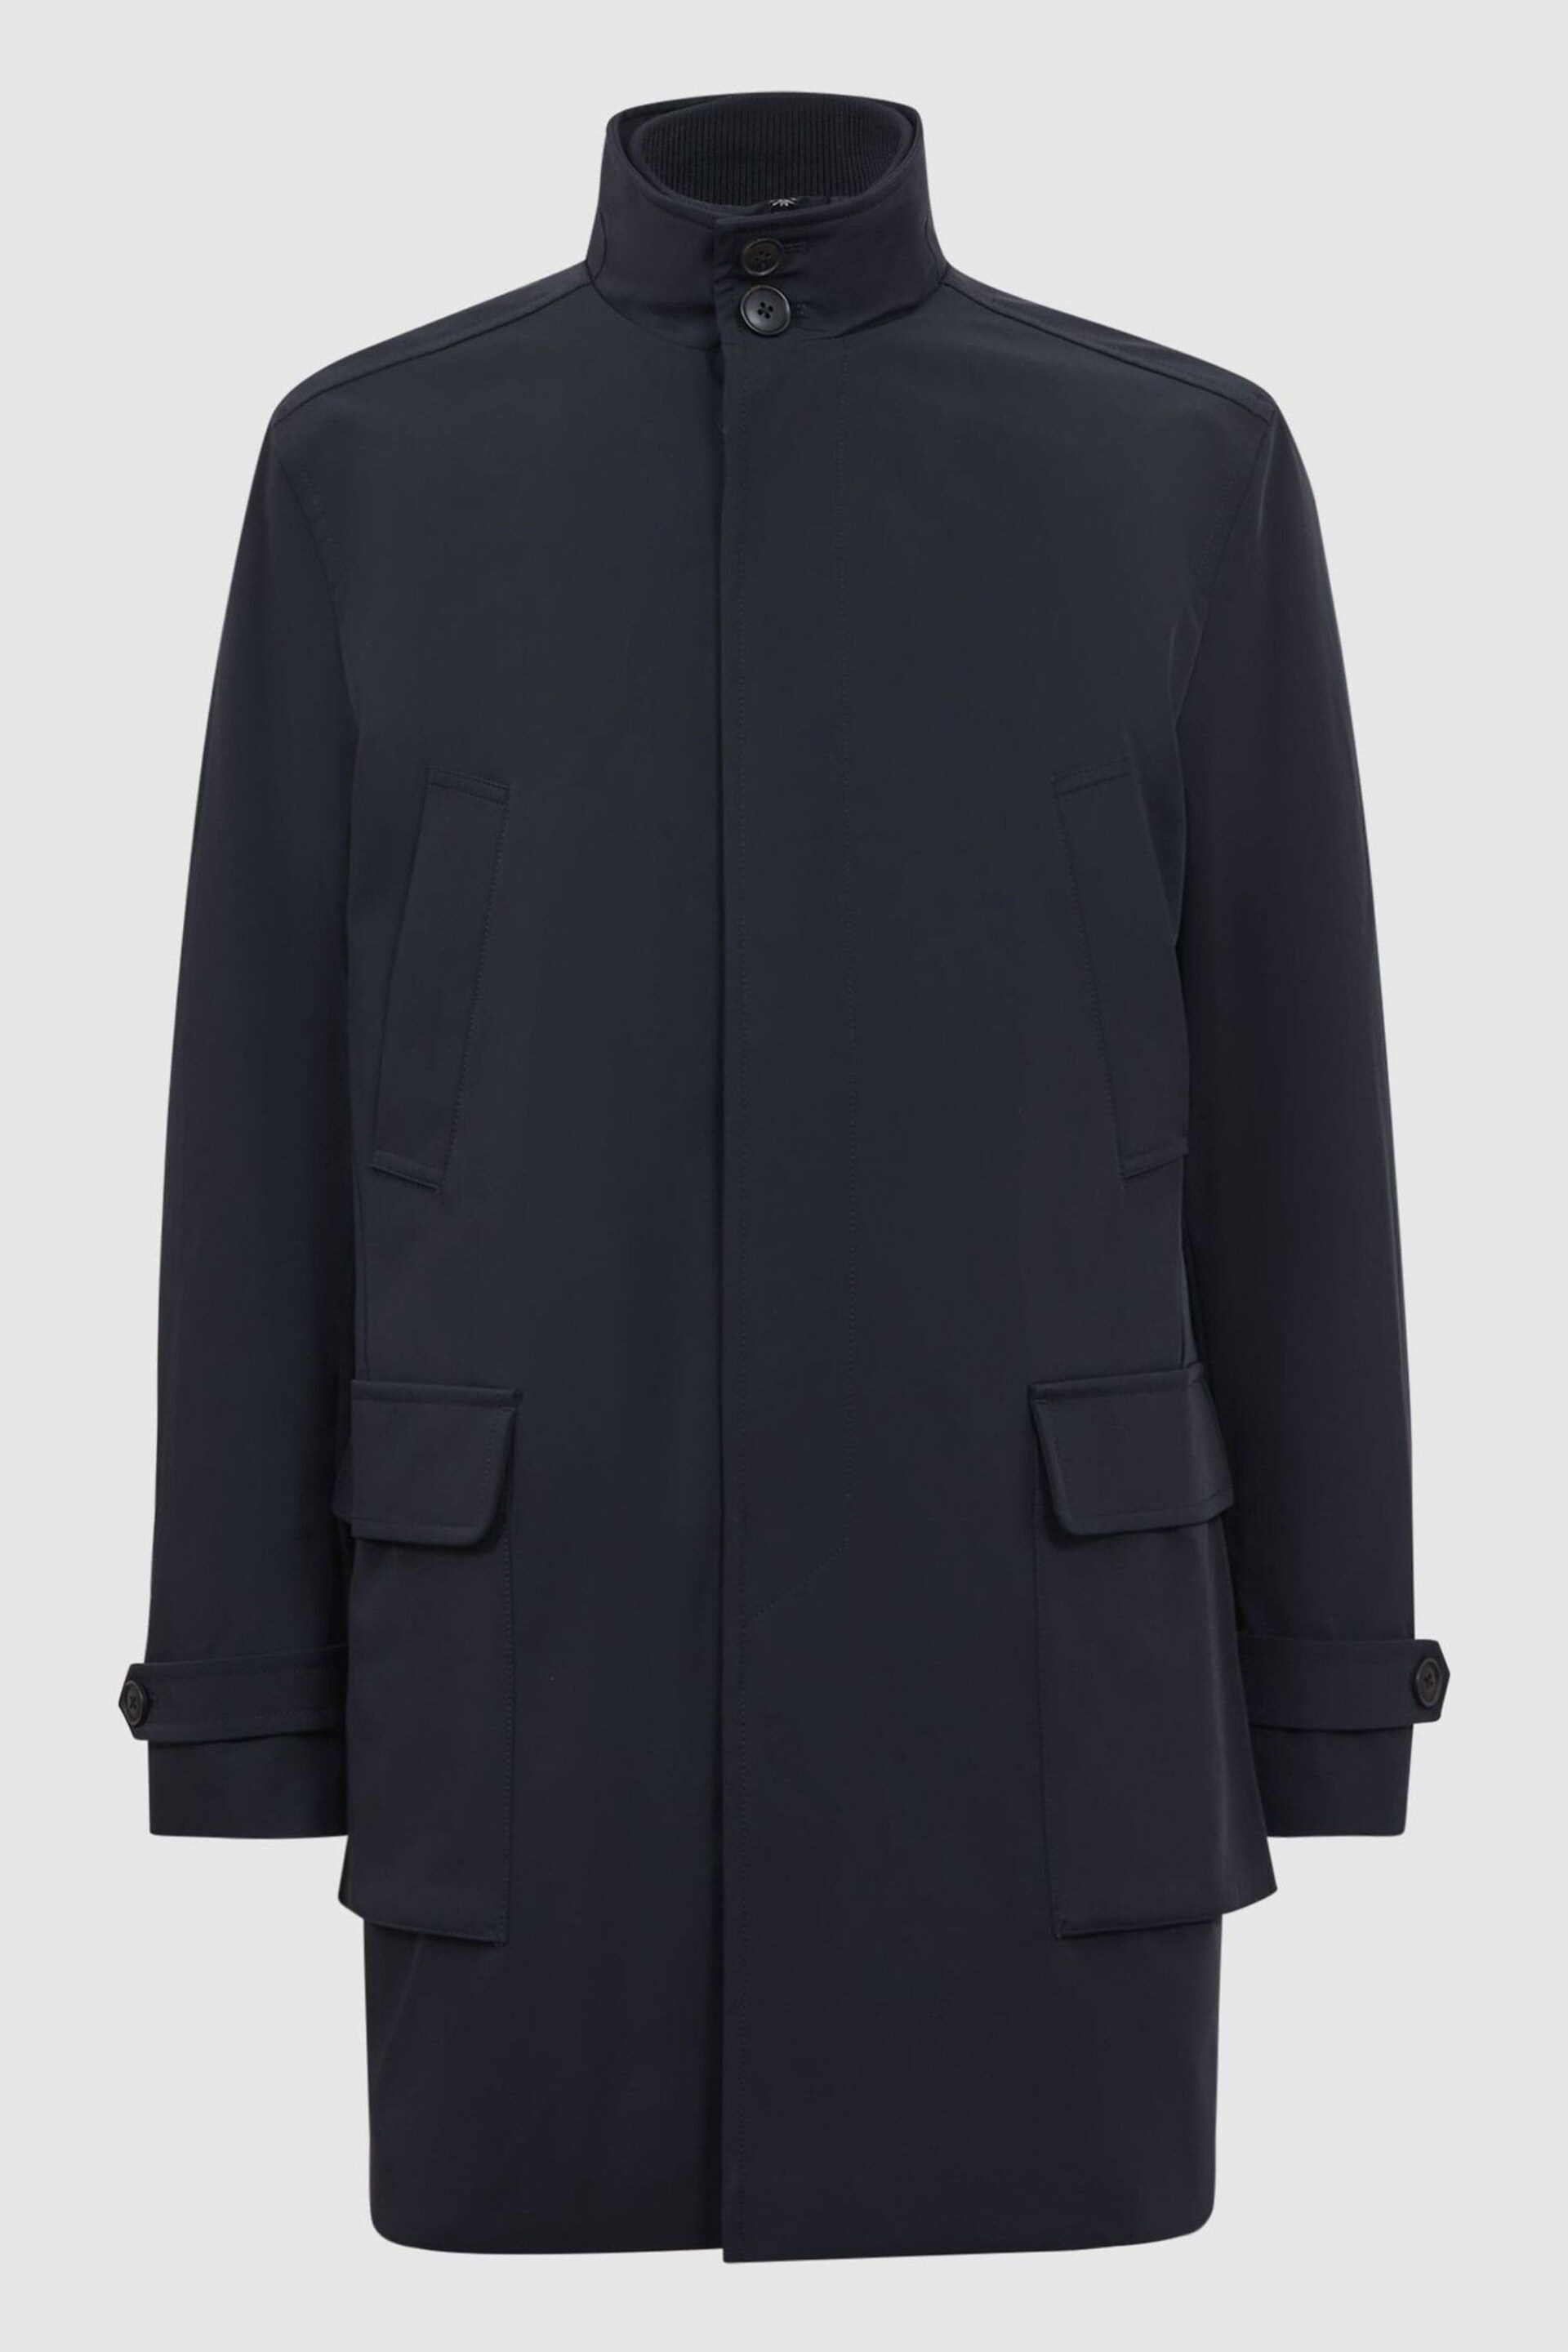 Reiss Navy Player Funnel Neck Removable Insert Jacket - Image 2 of 6